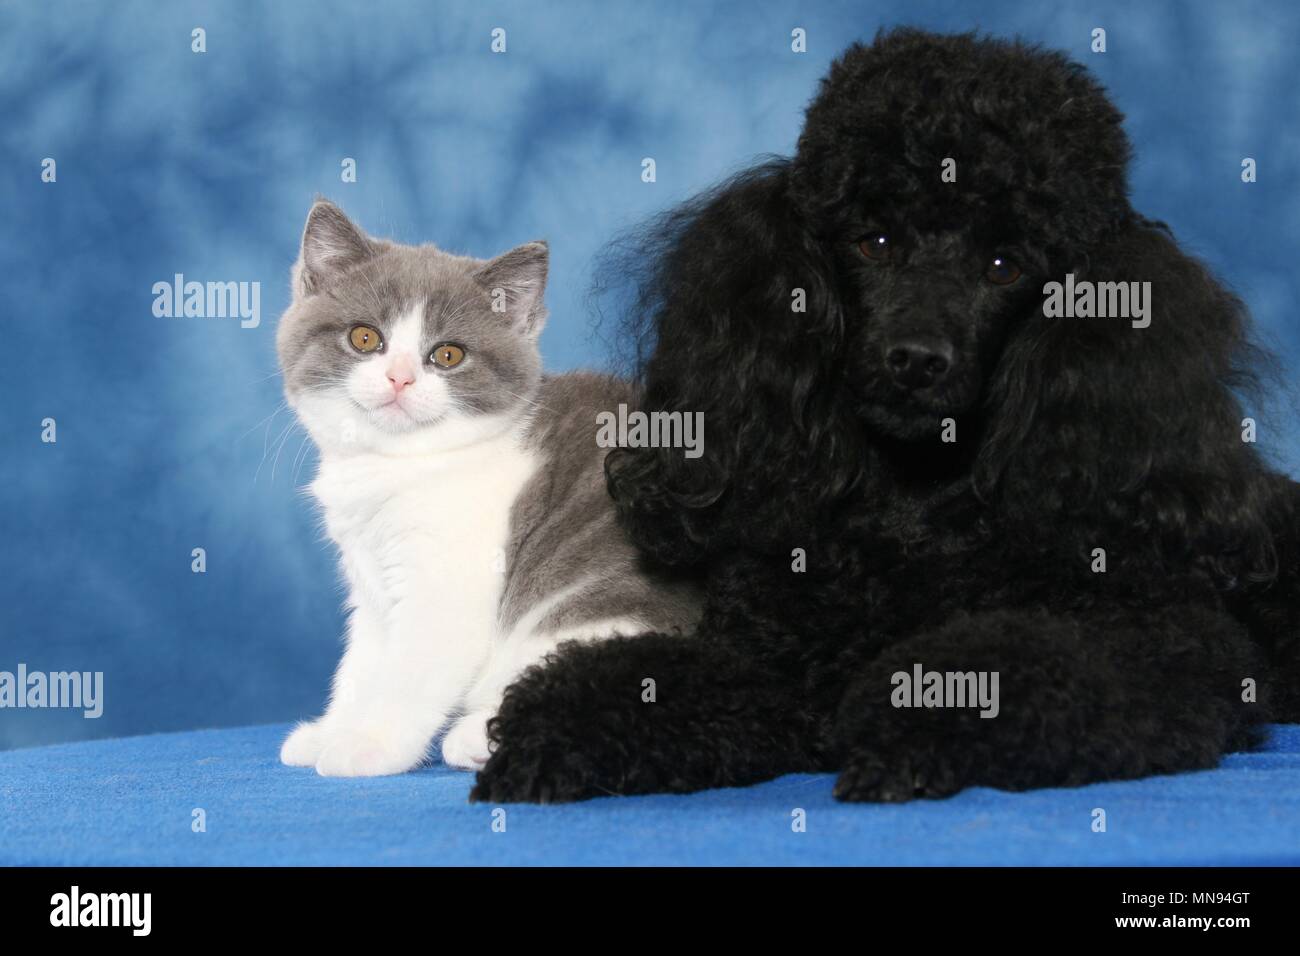 Miniature Poodle and Kitten Stock Photo